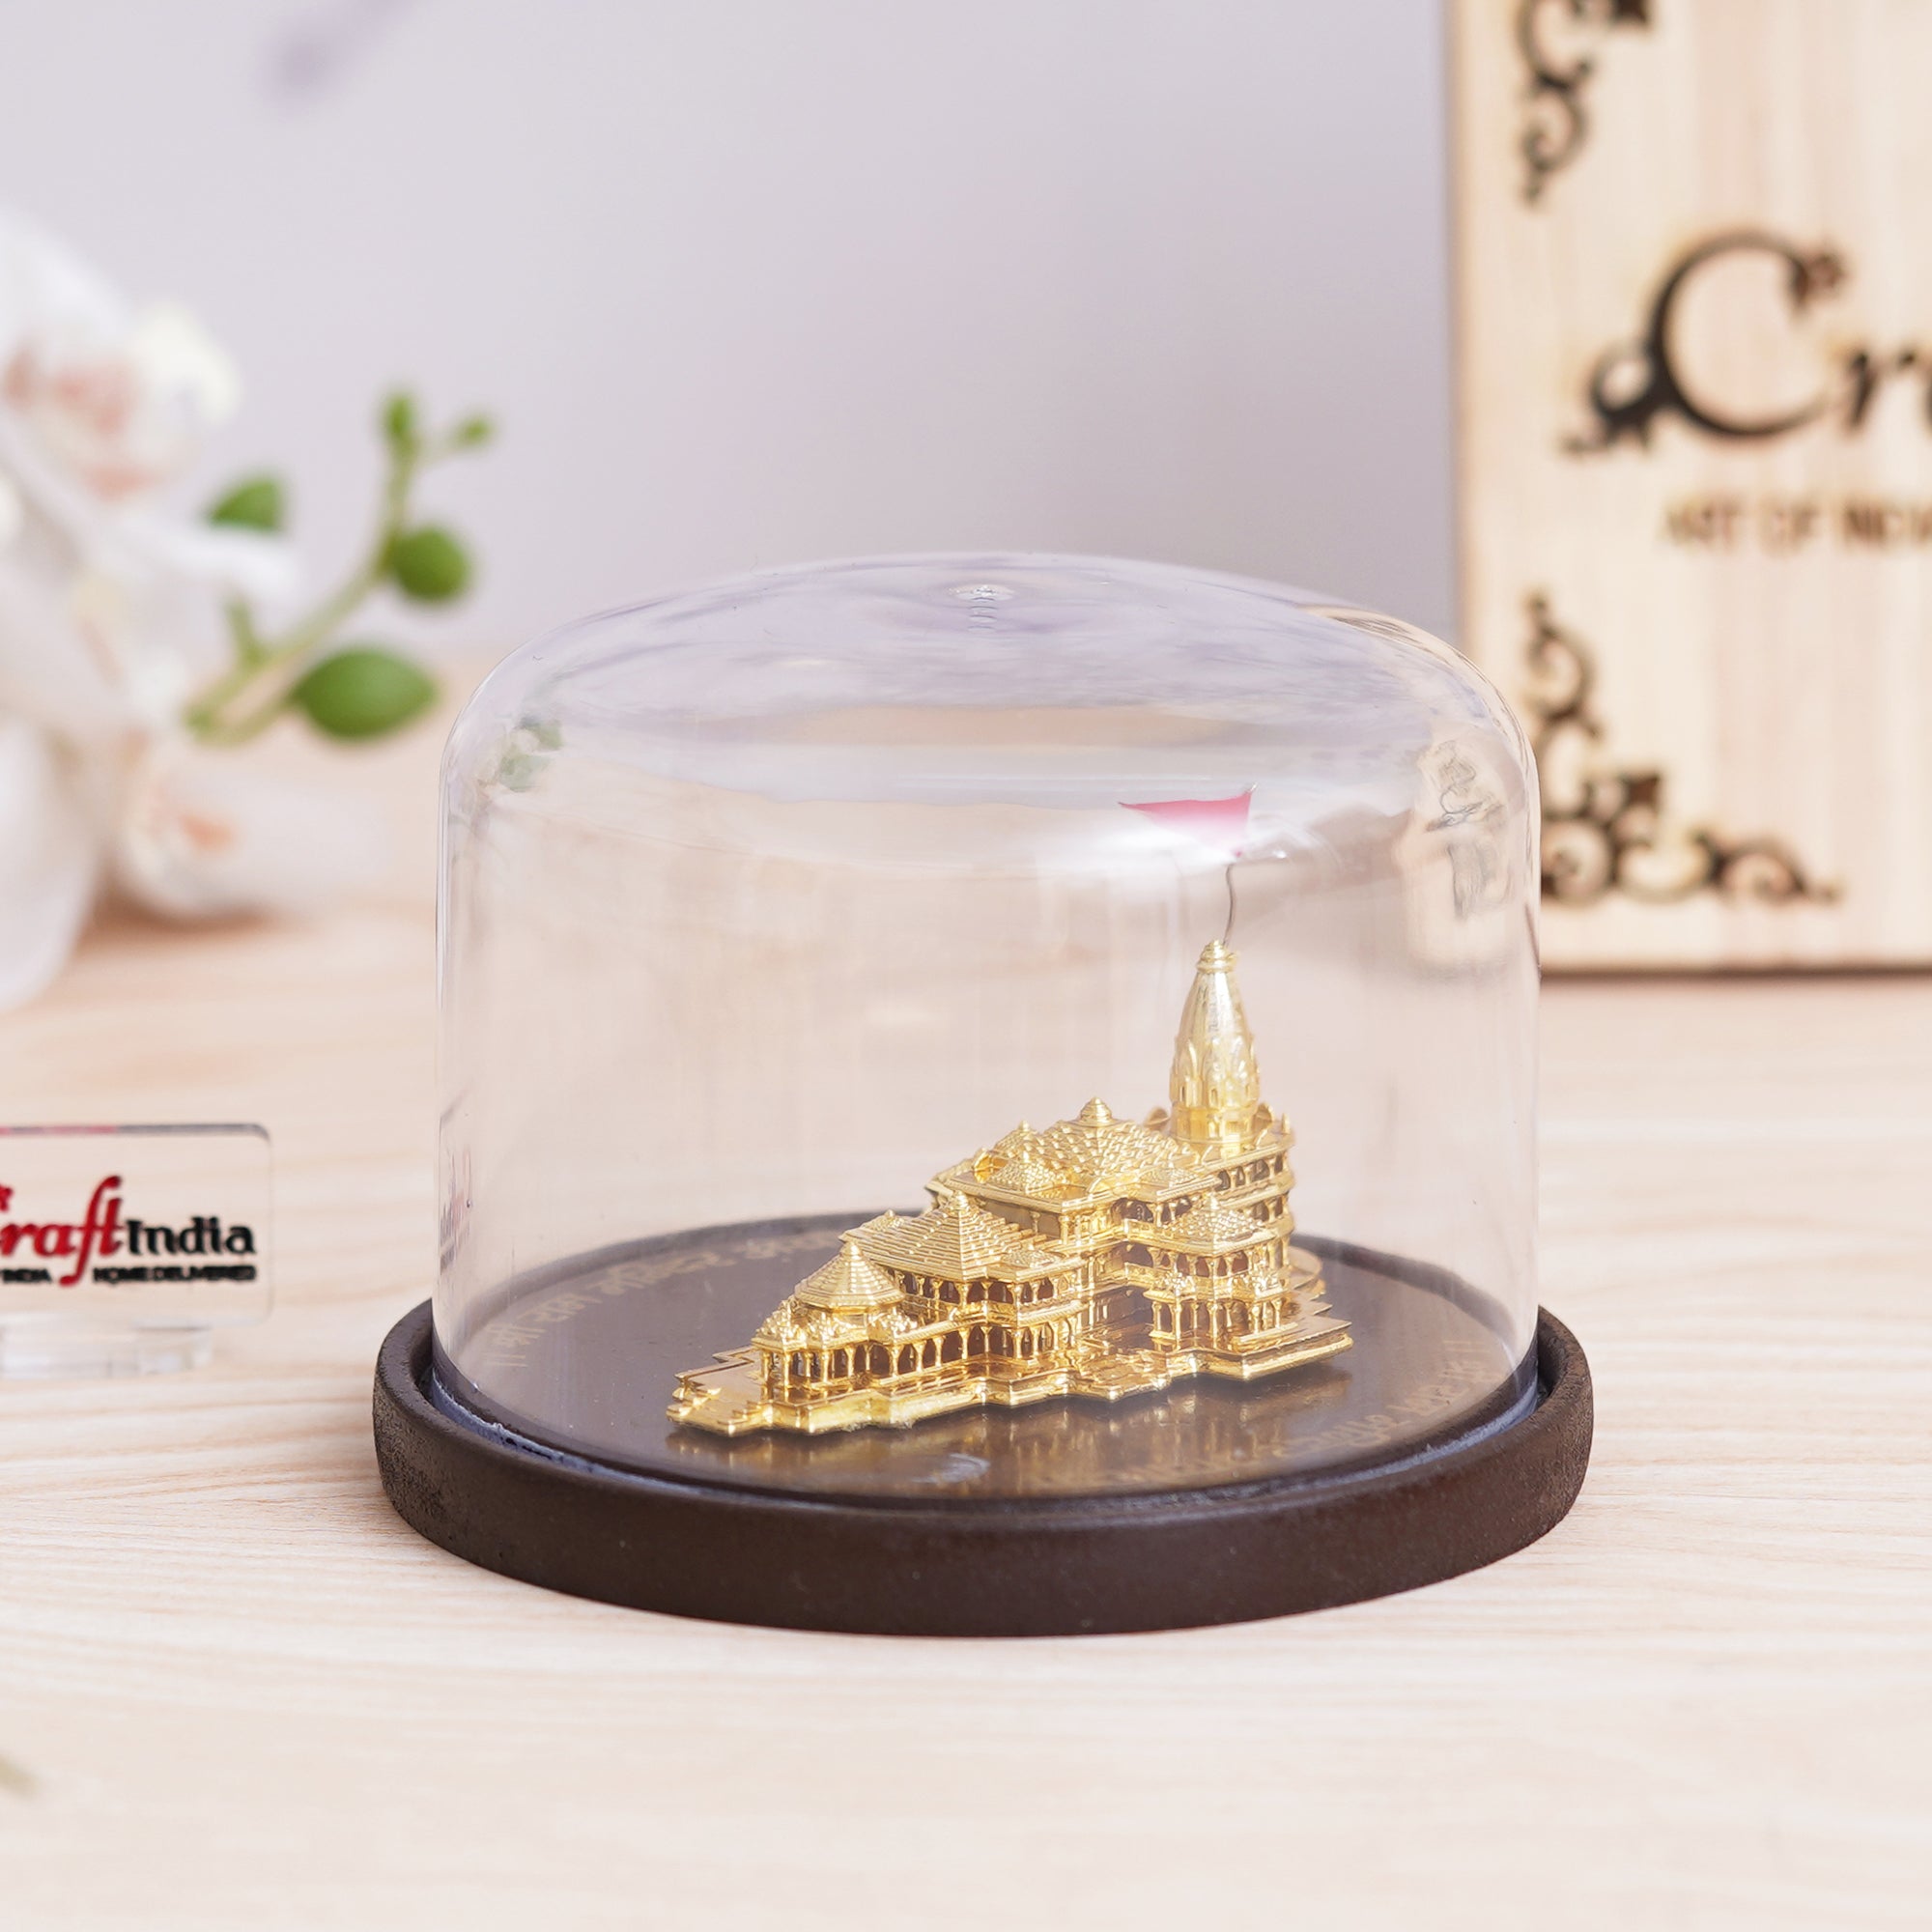 eCraftIndia Golden Shri Ram Mandir Ayodhya Model Authentic Designer Temple Covered by a Glass Dome - Perfect for Home Decor, and Spiritual Gifting 1